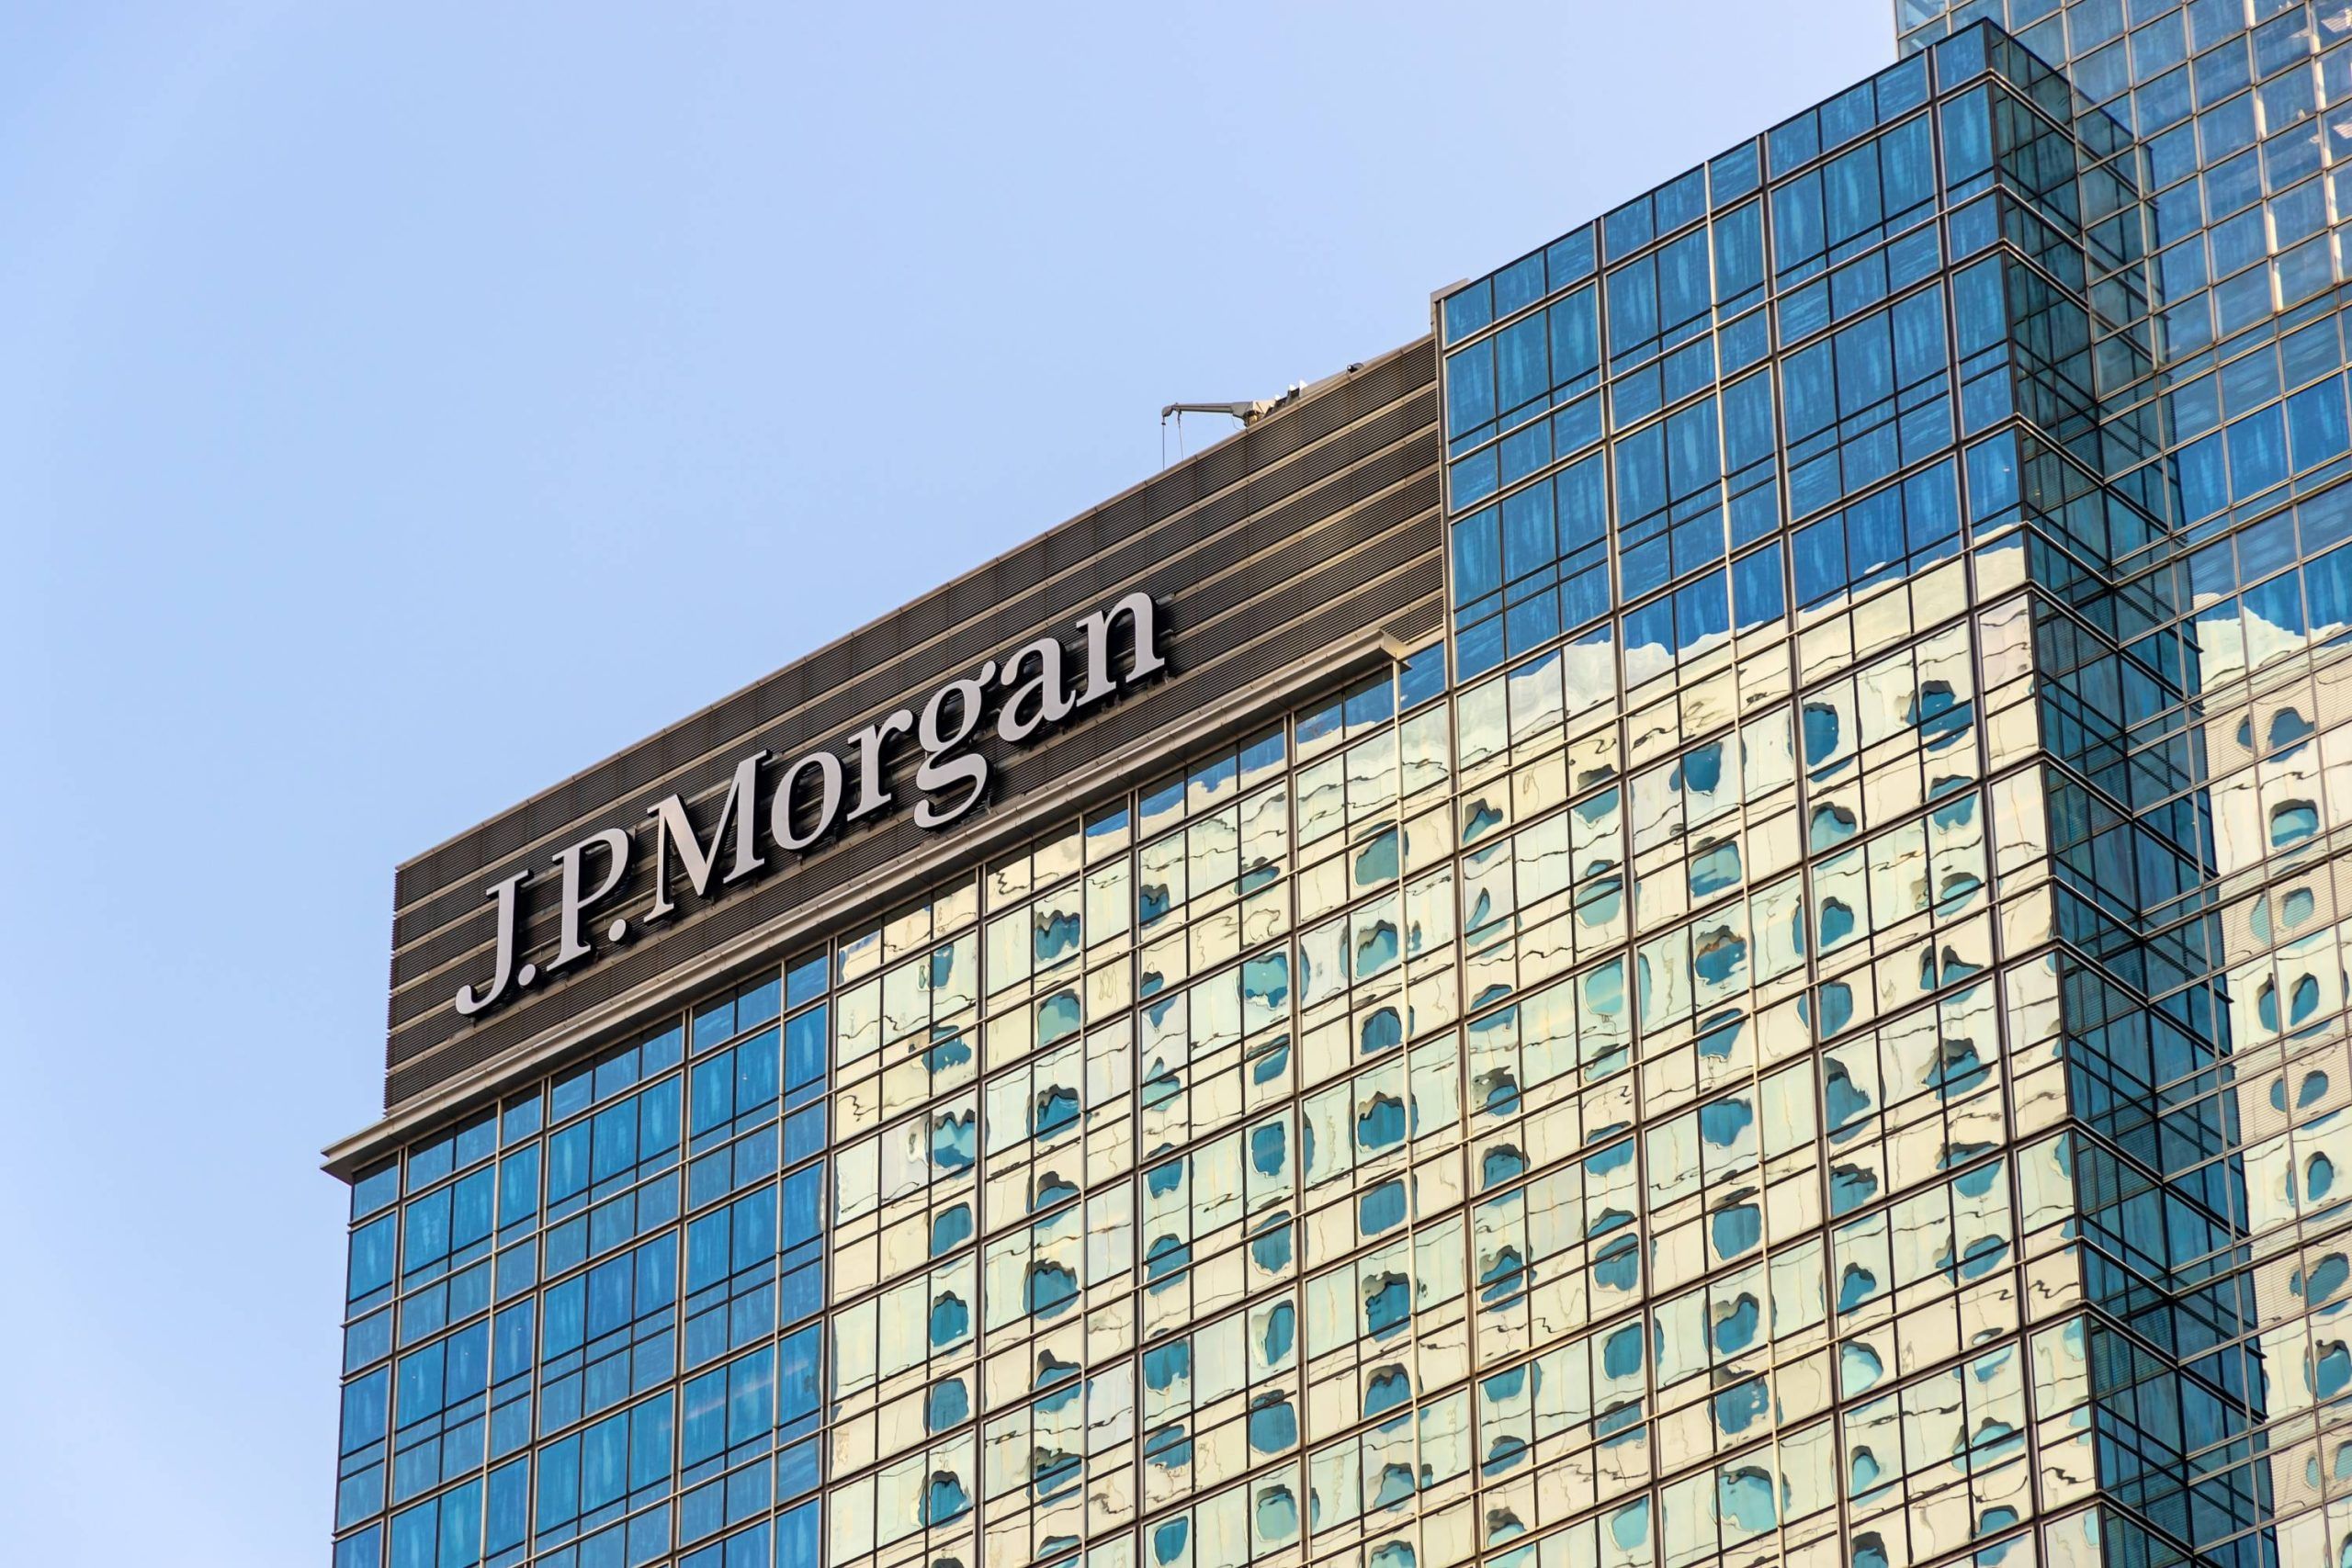 J.P. Morgan Chase Puts Investment Bankers Into Open Office Spaces - macau | Fortune